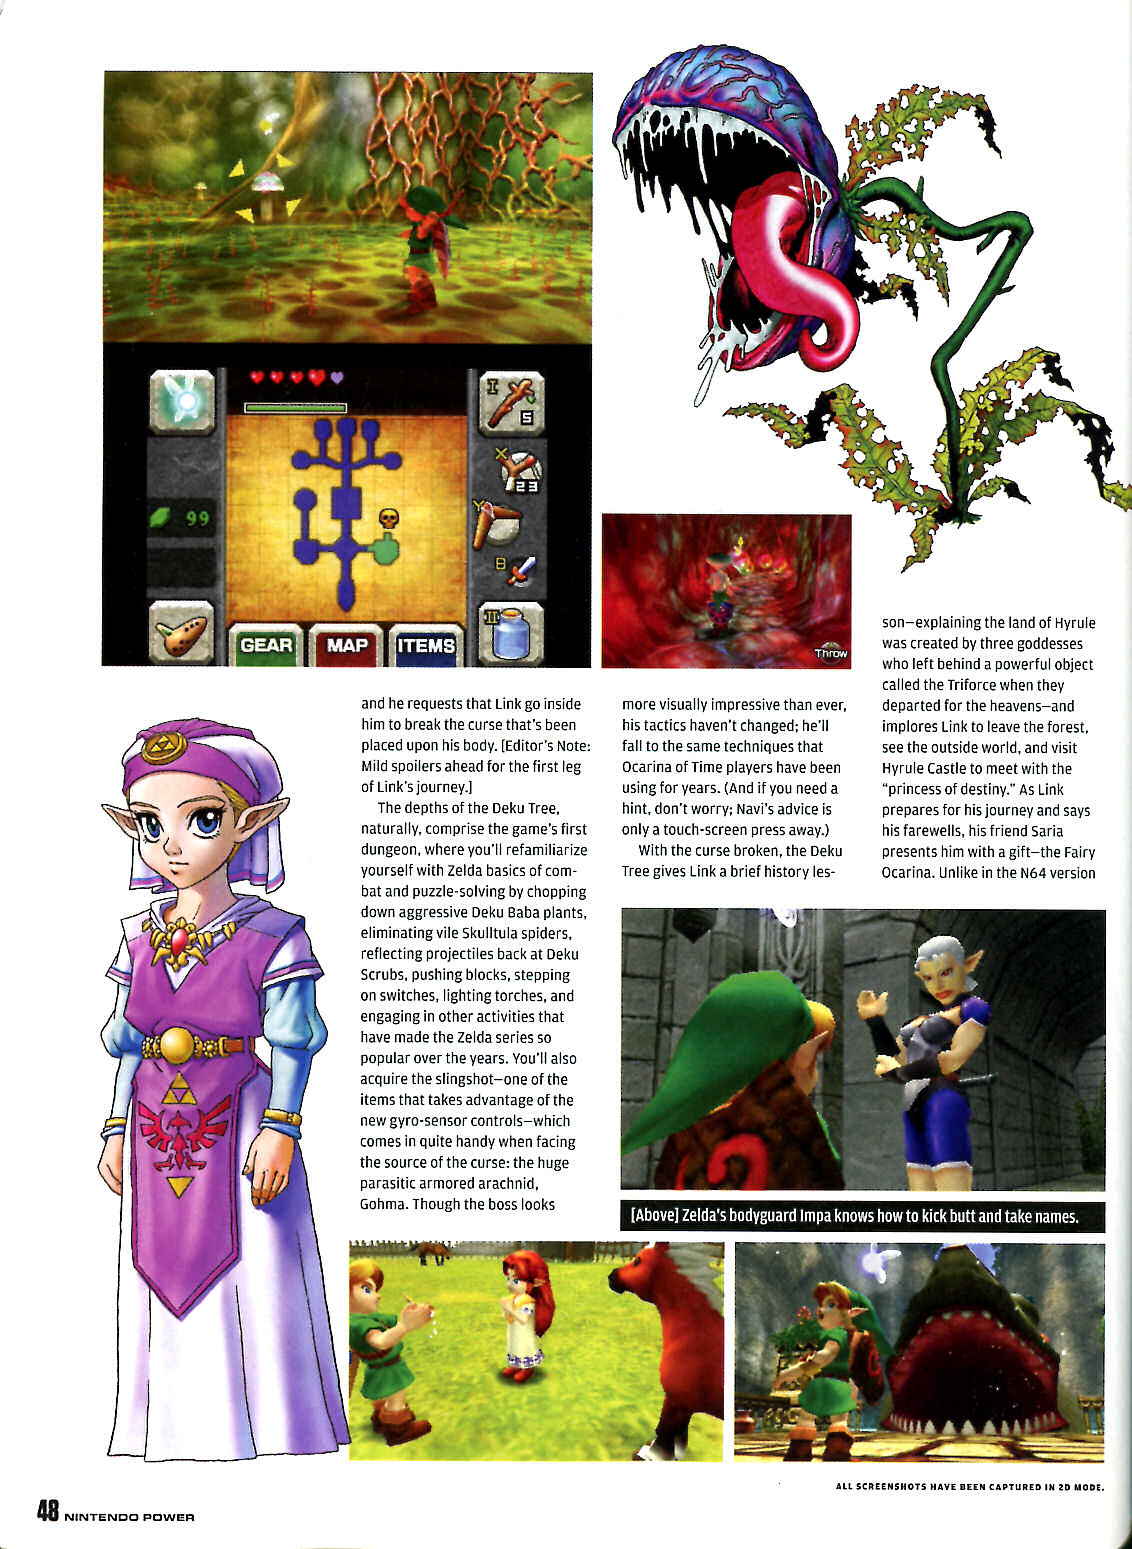 Parent's Guide: The Legend of Zelda: Ocarina of Time 3D, Age rating,  mature content and difficulty